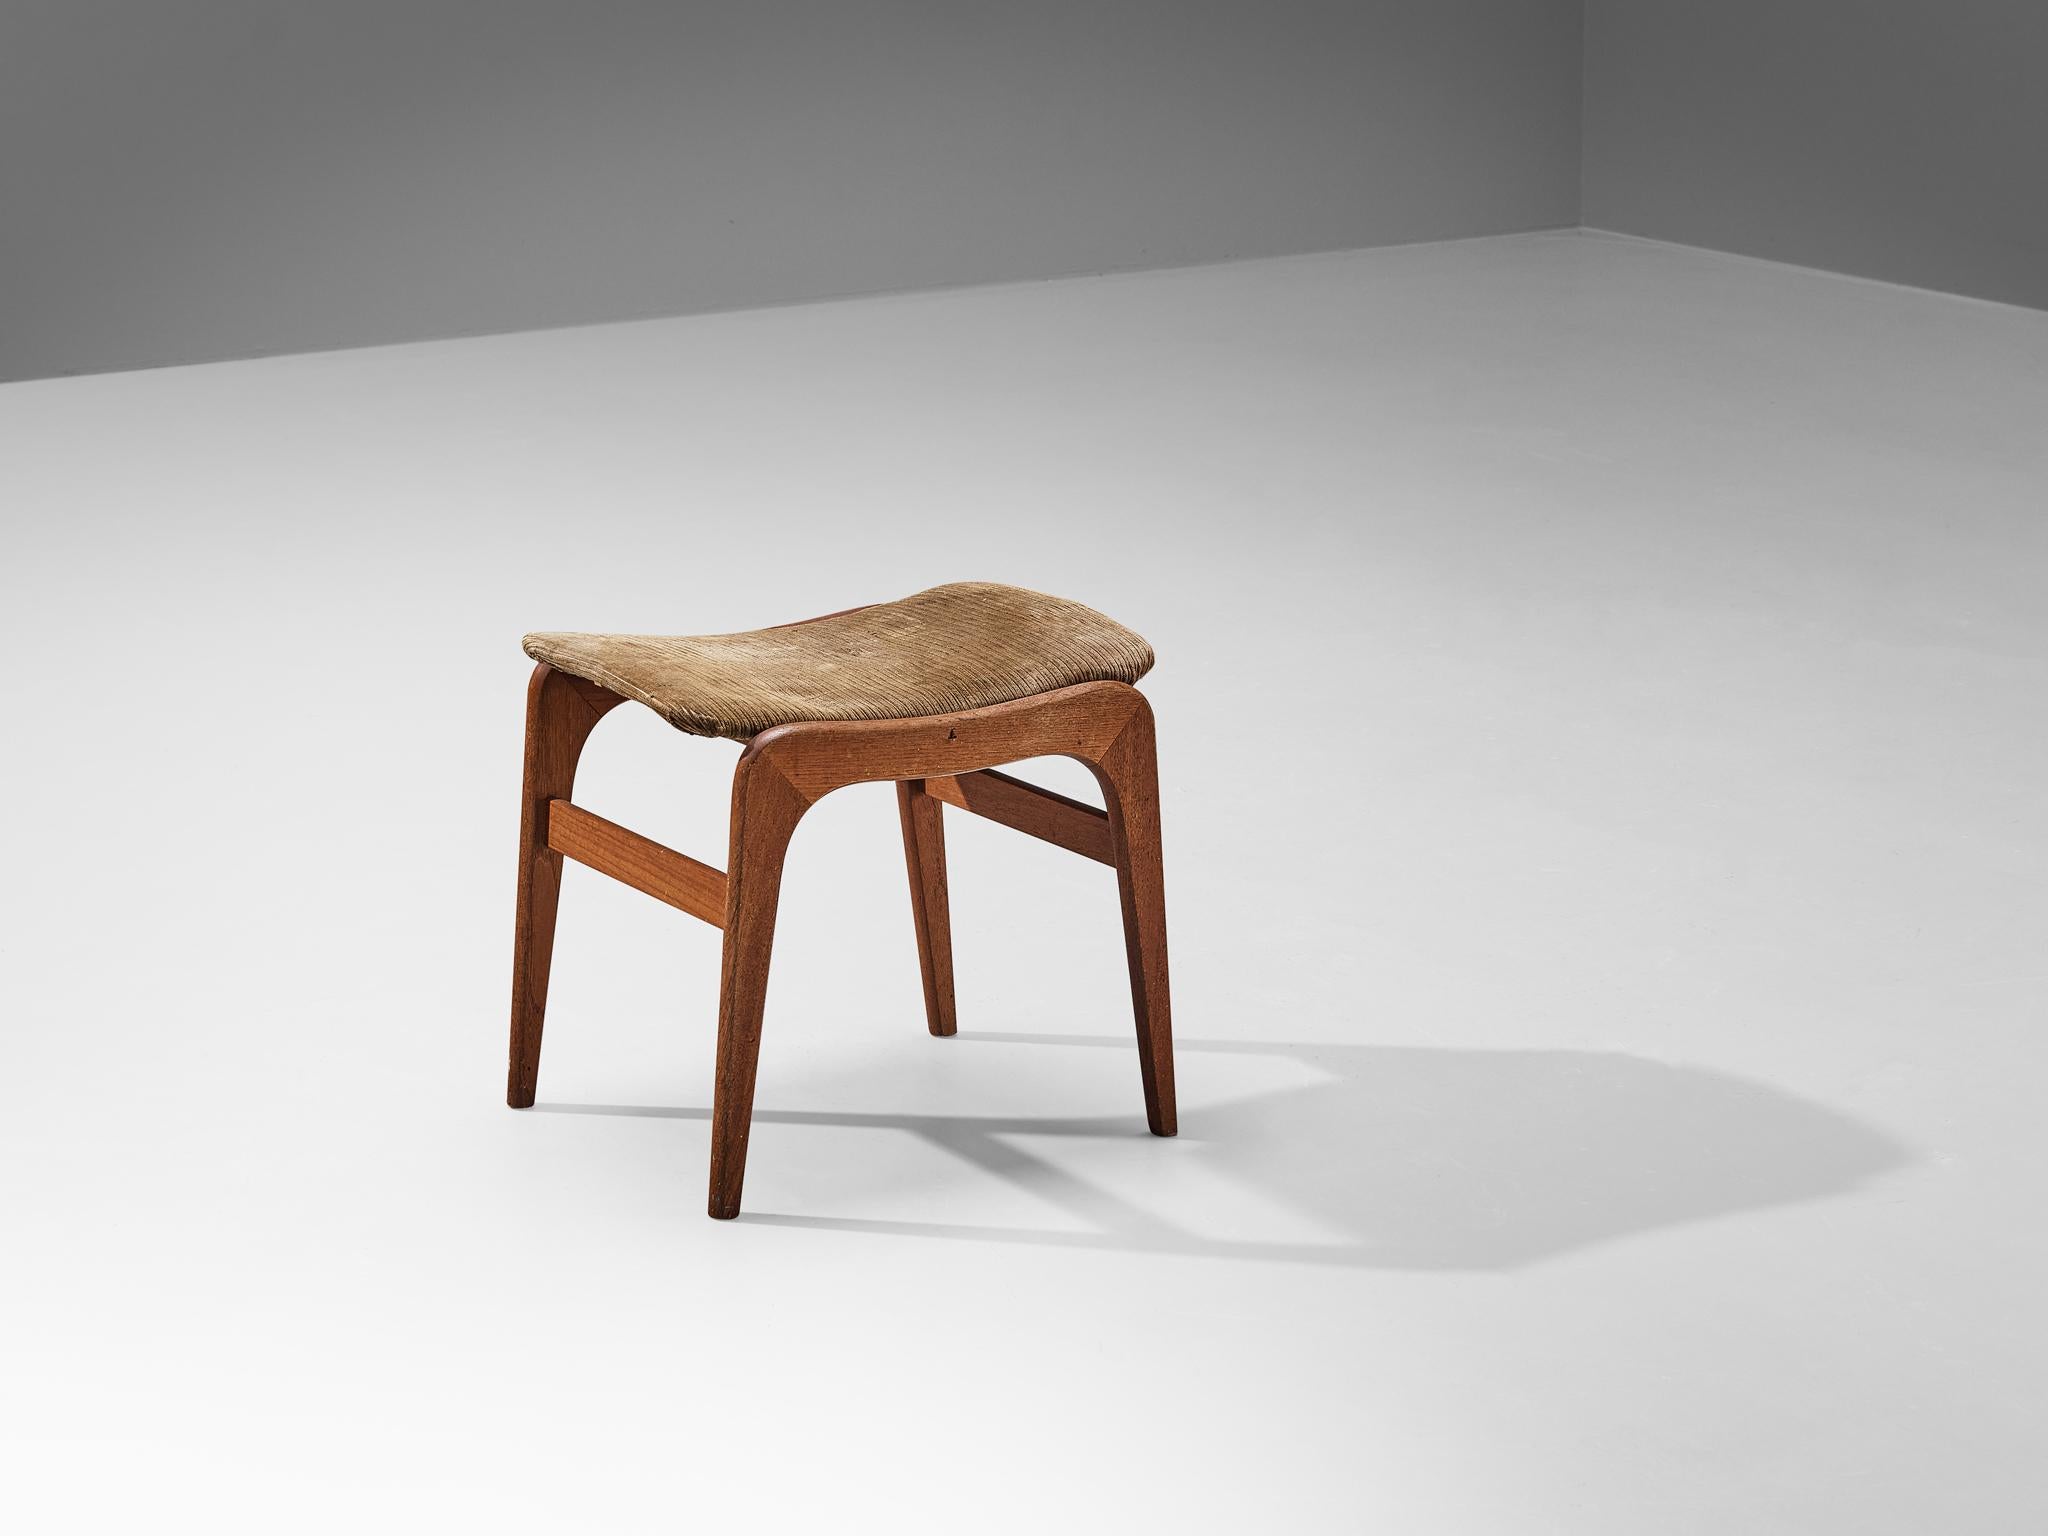 Stool or ottoman, teak, corduroy, Denmark, 1950s

This item is designed according to the Scandinavian Modern design principles: simple in line, implementation of fine materials, and practical to use. The teak framework and seat feature subtle curved